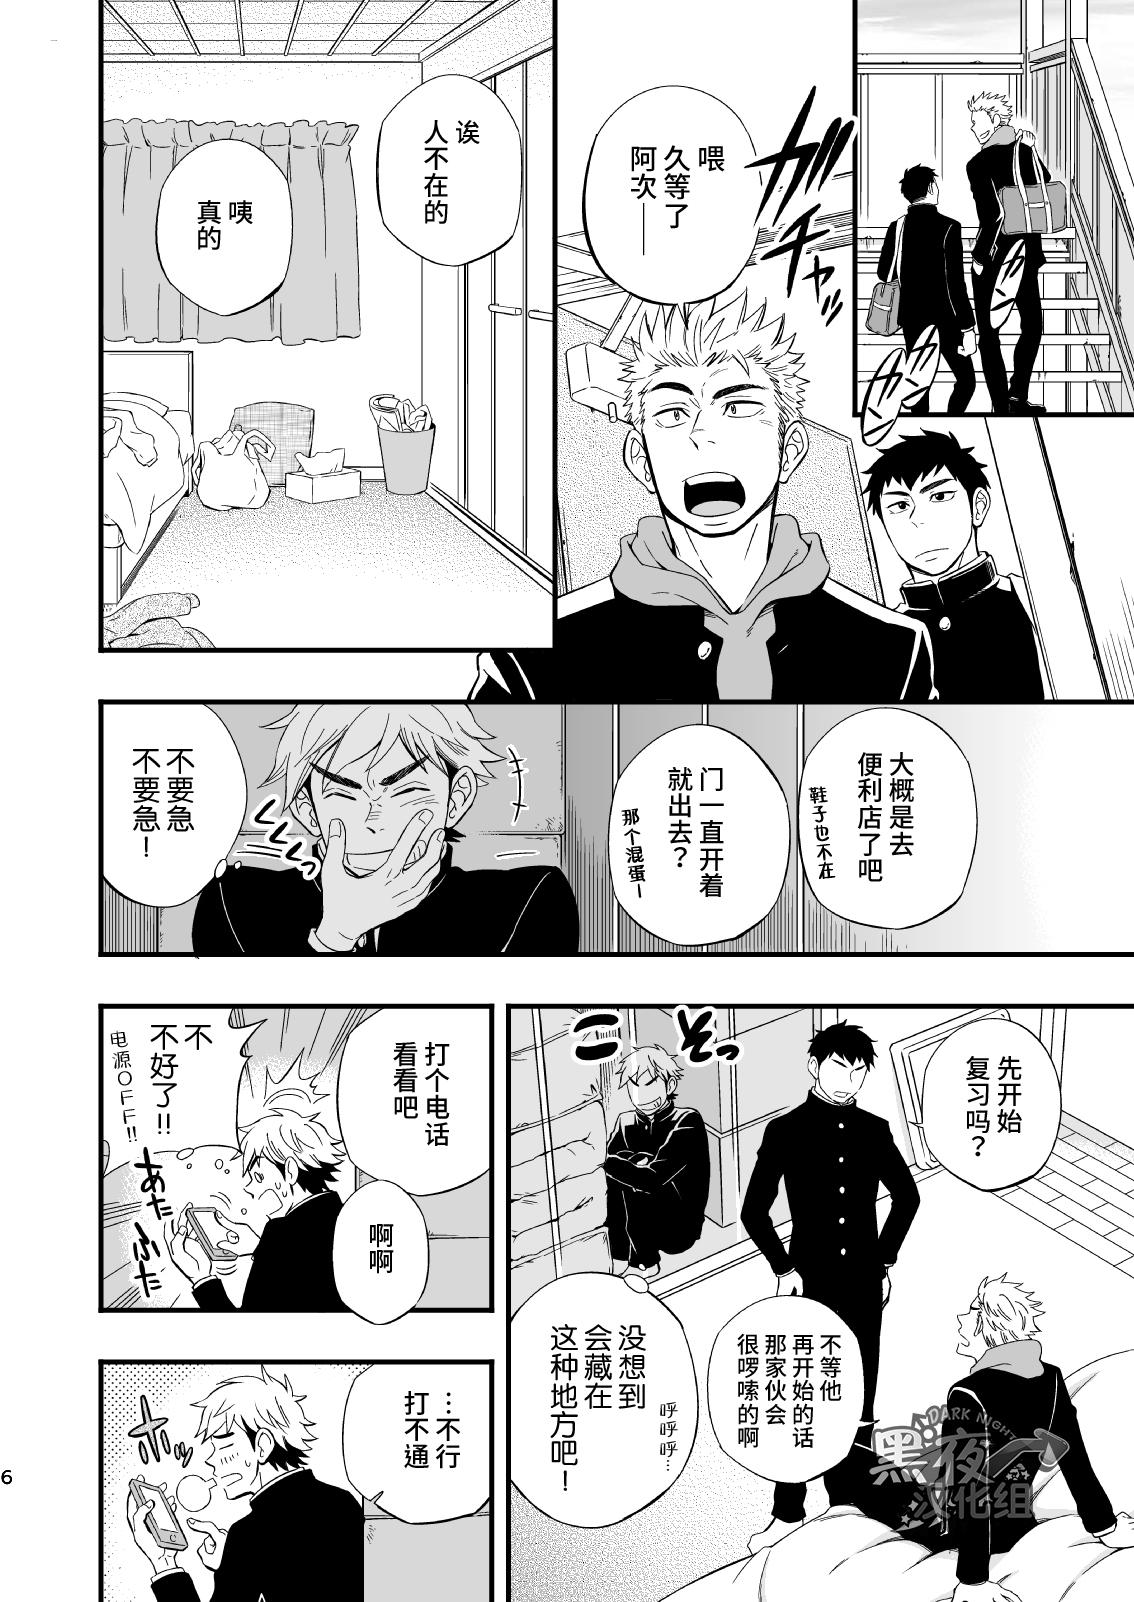 Old And Young 3 Centimeter Junkie | 3厘米成瘾者 Brasil - Page 7